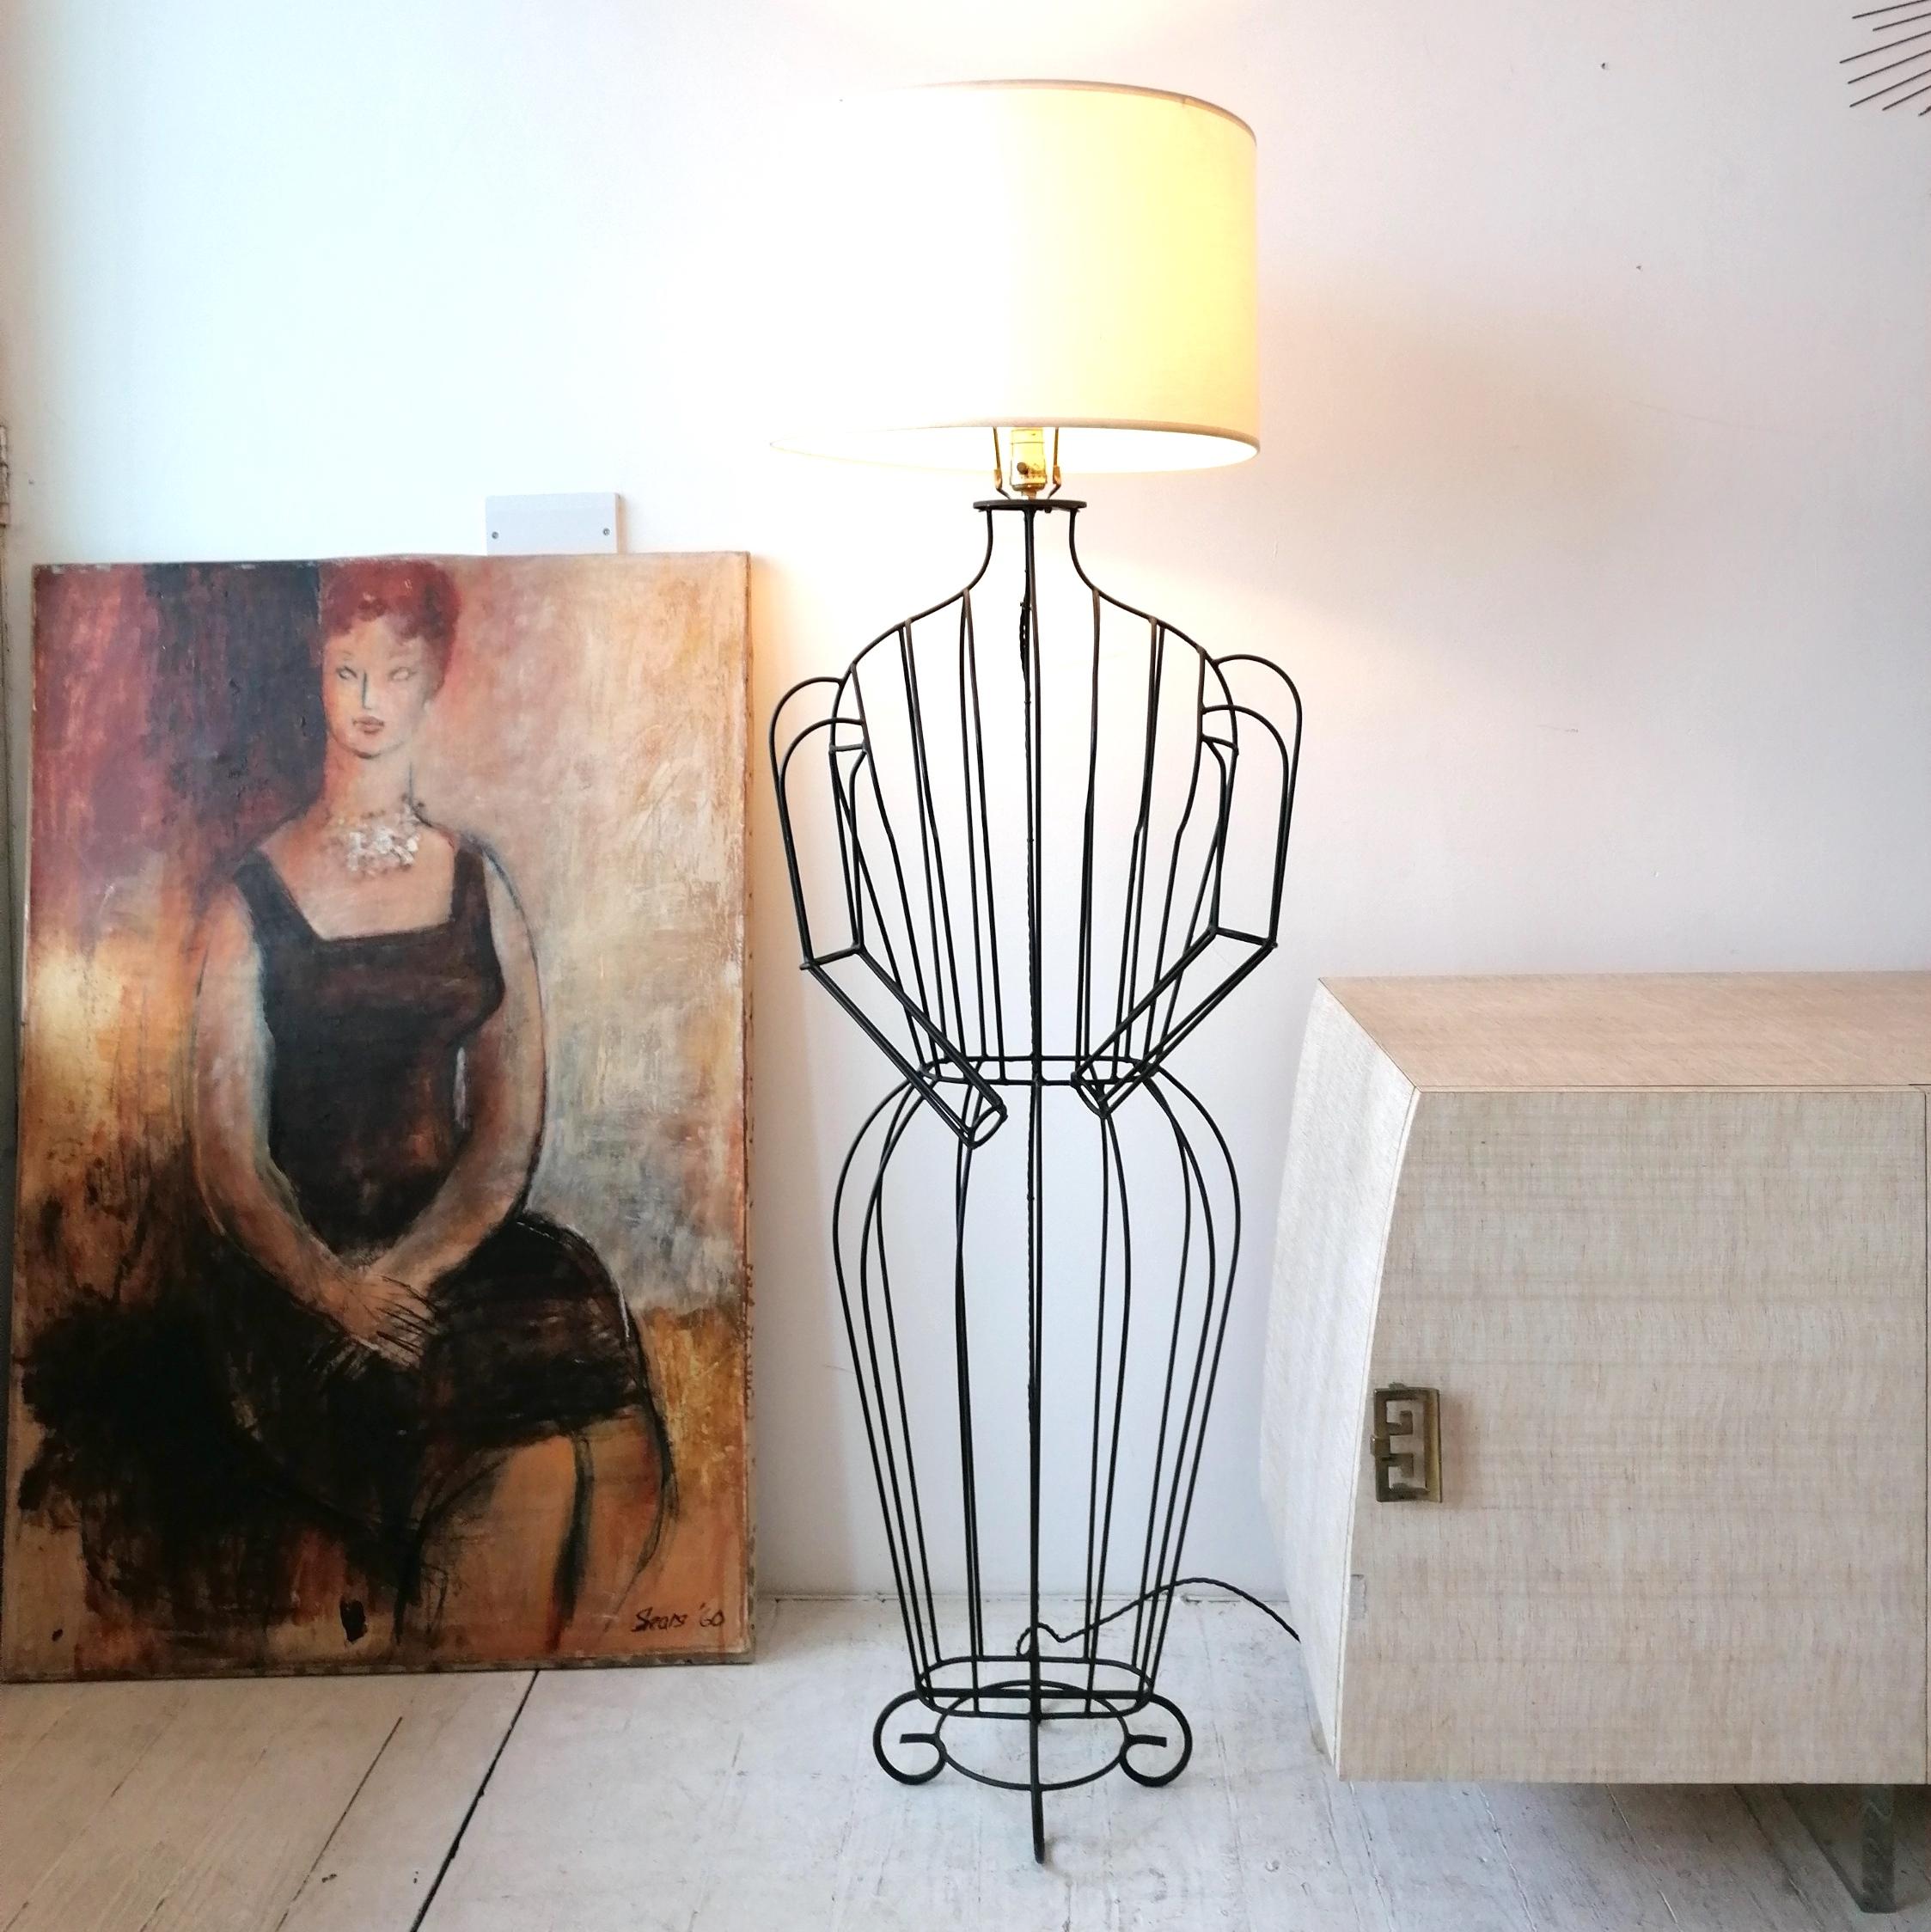 Rare quirky mid century John Risley figural 'Mannequin' floor lamp, USA 1960s. Black iron wire construction. Newly rewired with braided cord.
Lampshade included- this has a little surface dirt.

Dimensions: height to top of shade harp 149cm, width